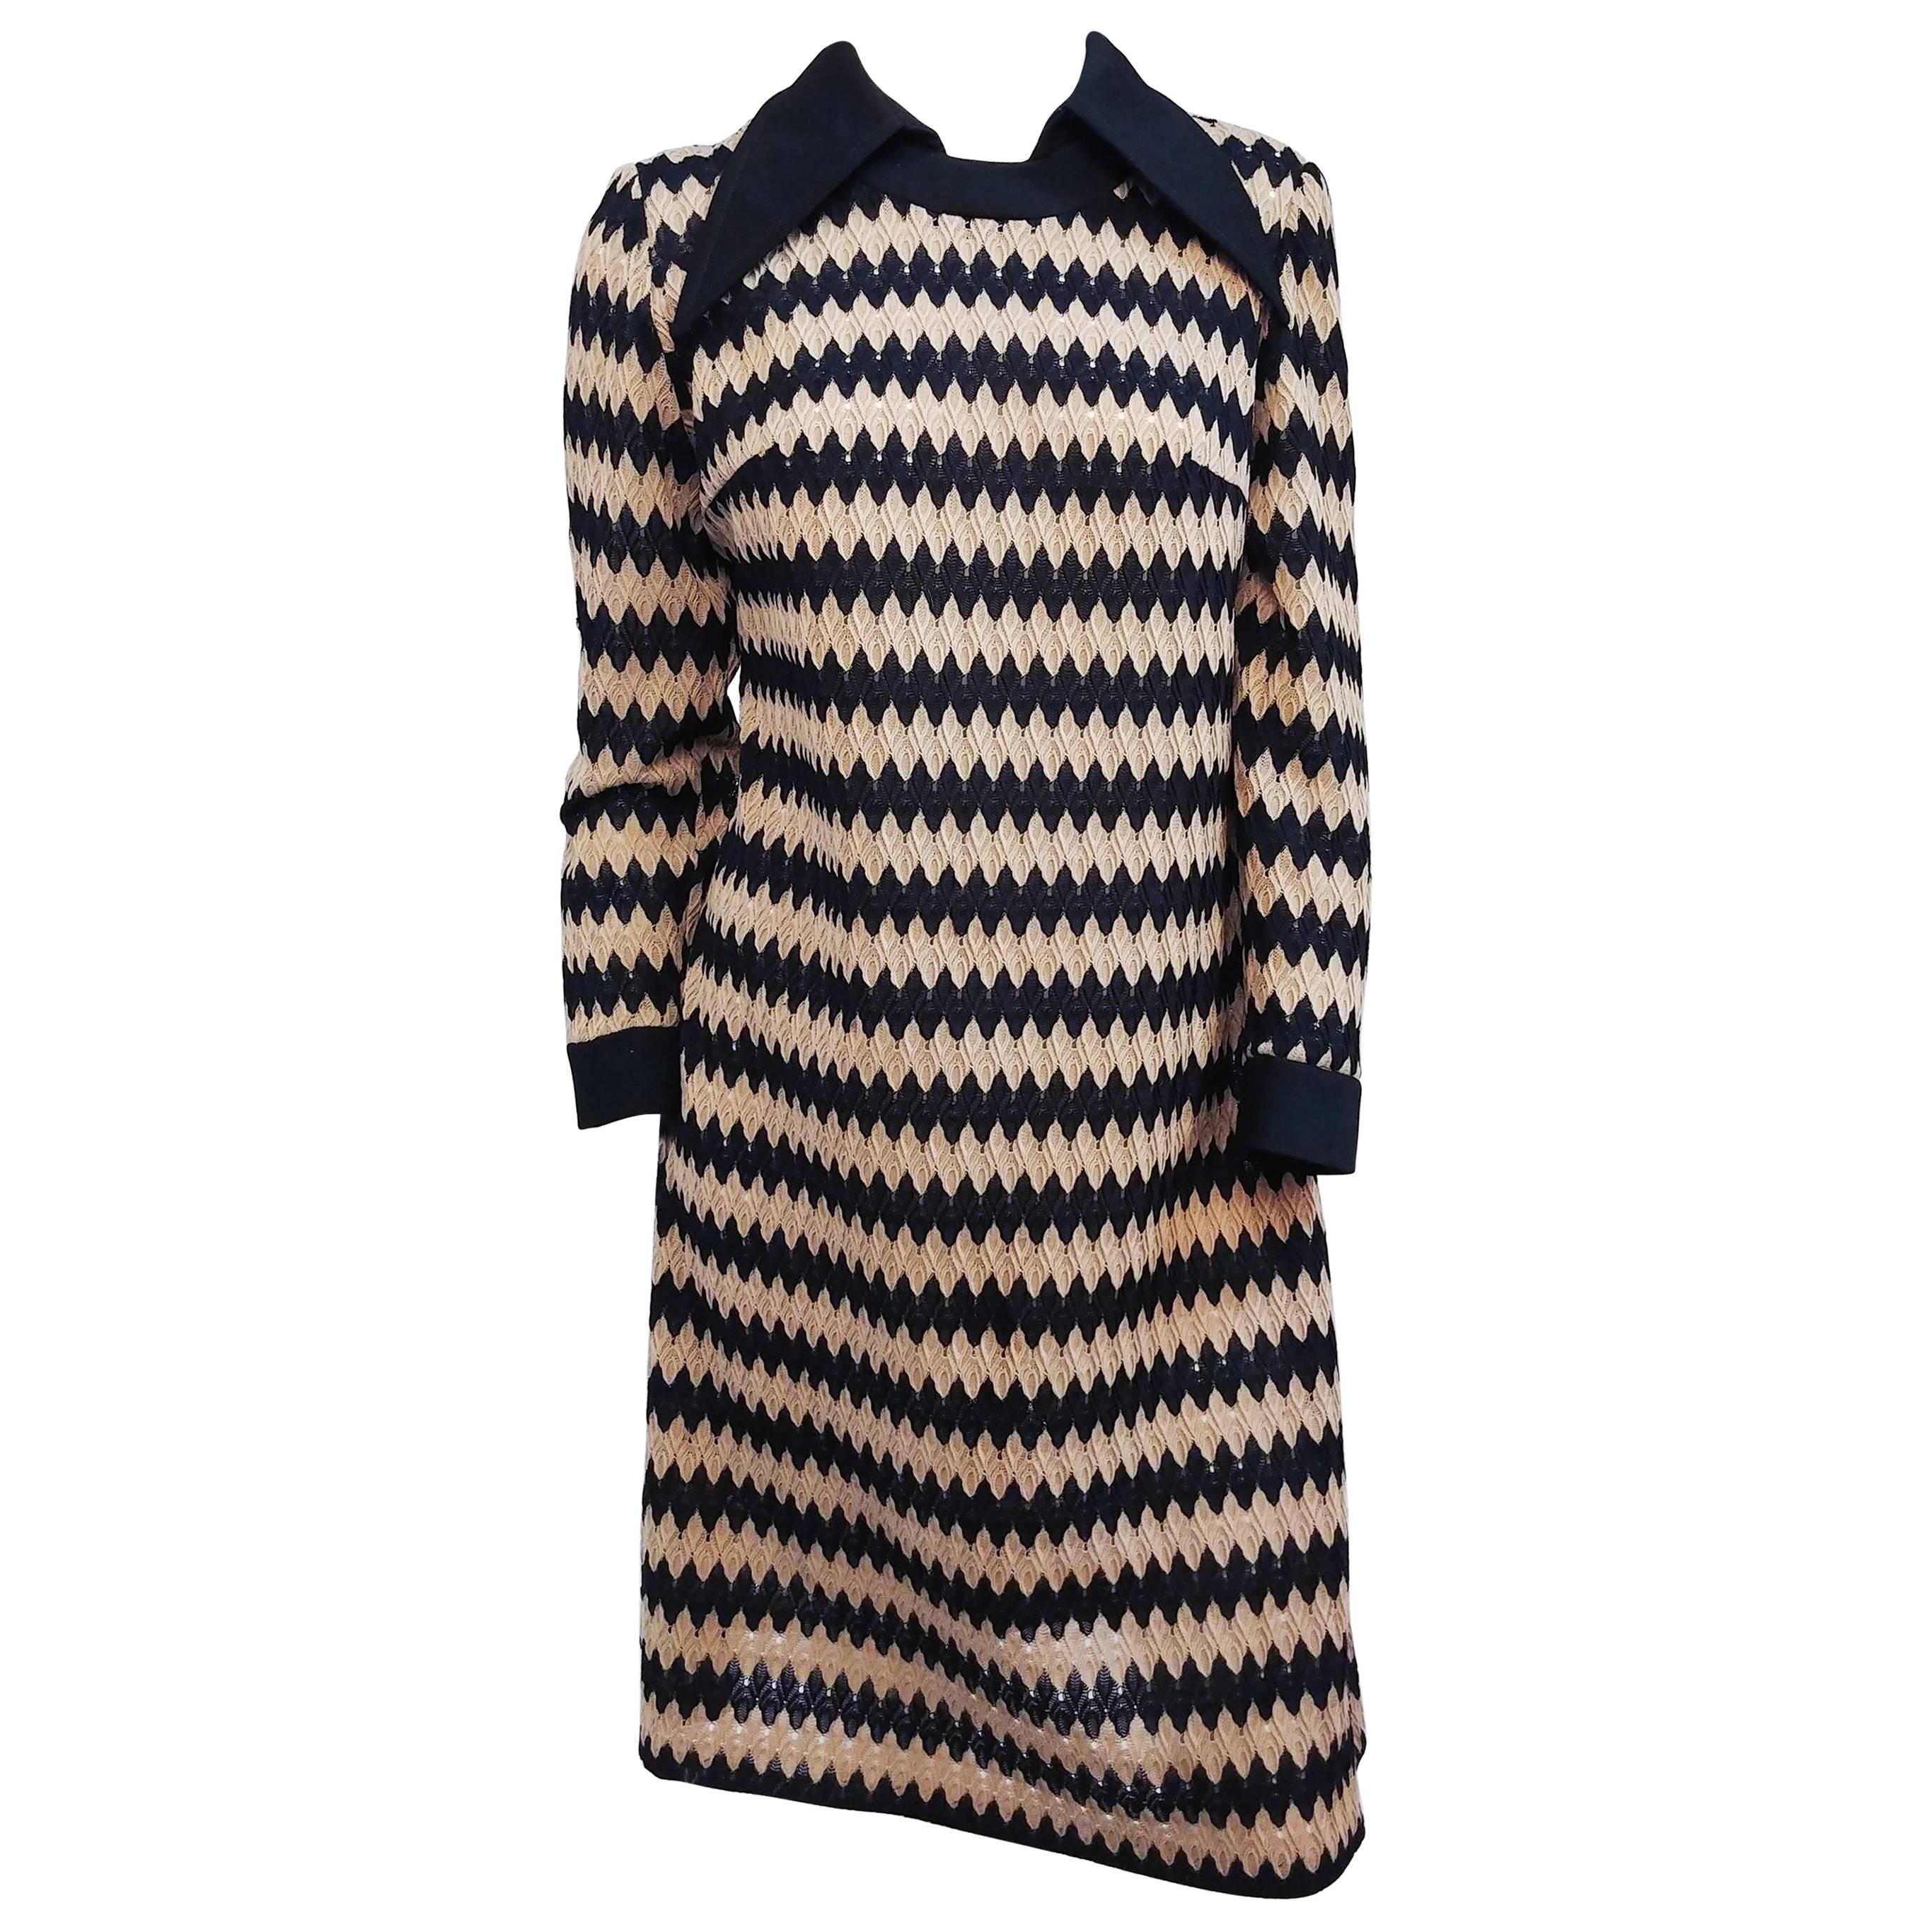 Tan and Black Knit Zig-Zag Collared Dress, 1970s For Sale